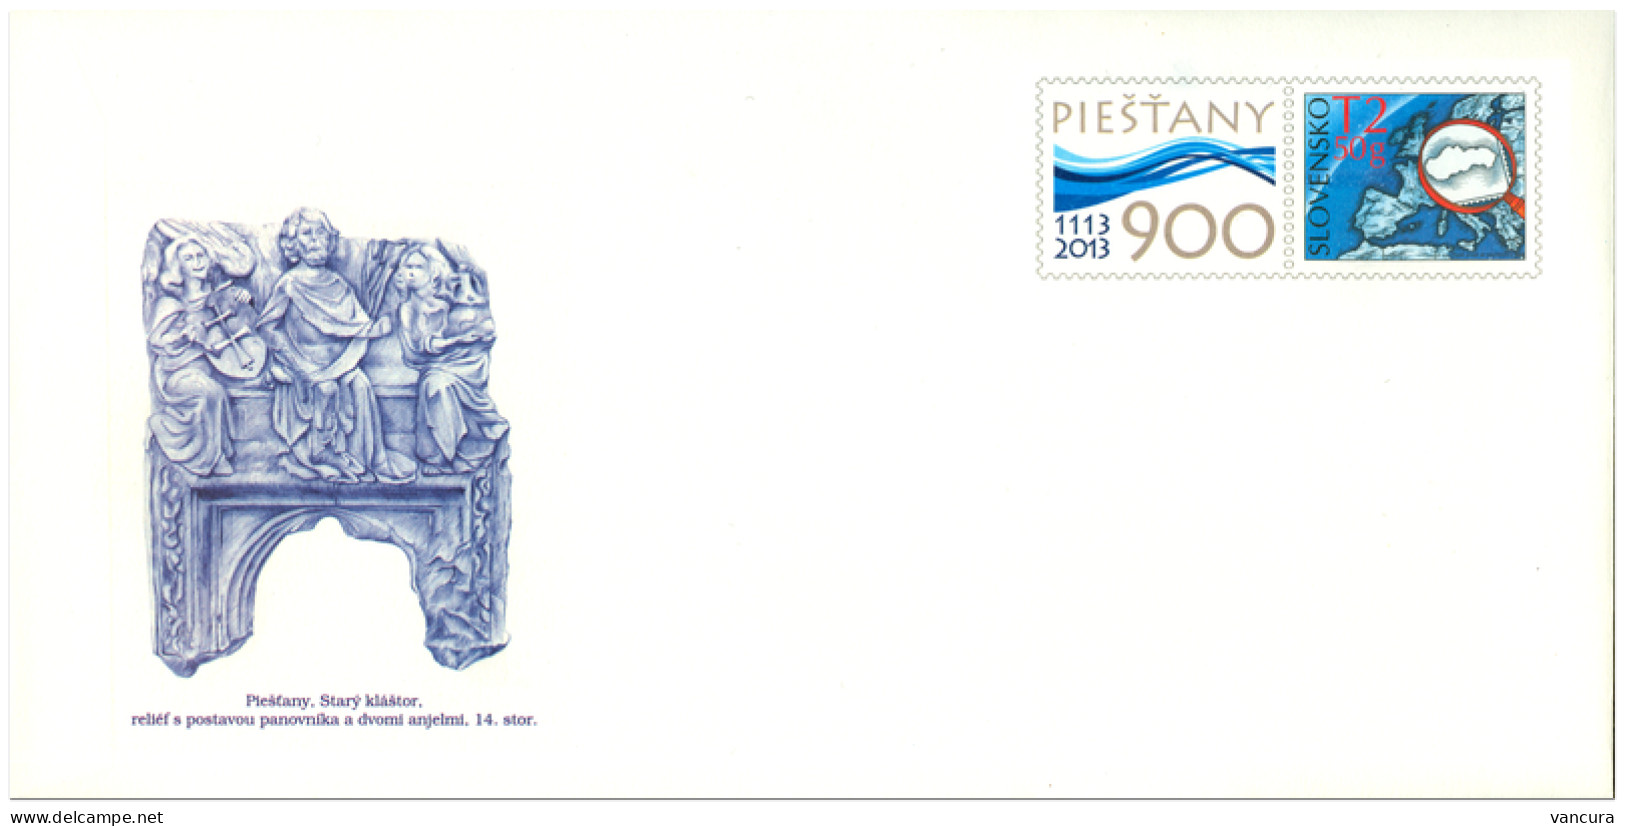 ** 002 COP Slovakia 900th Anniversary Of Piestany 2013 - Hydrotherapy